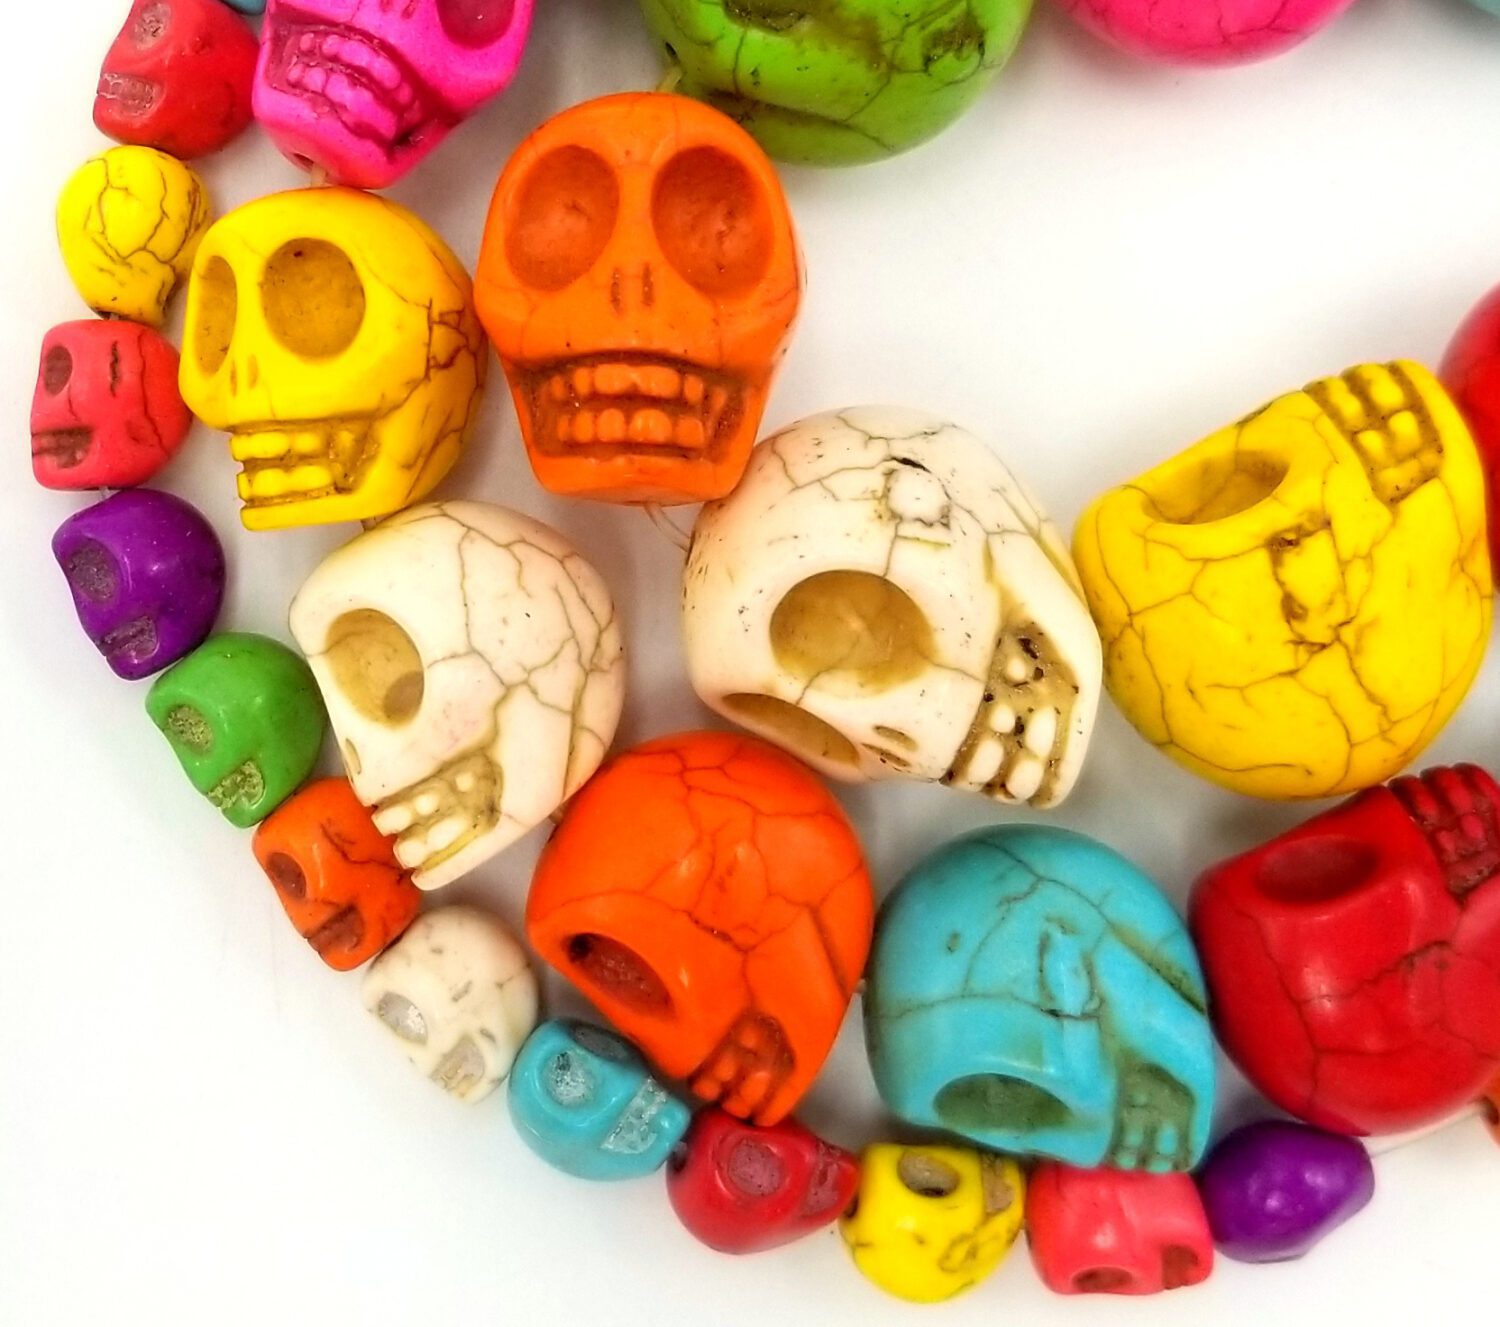 Assorted Skull Beads Howlite Dyed Stone Beads Carved Stone Skull up to  22x18mm 15.5″ Full Strand ORG036 - BeadsCreation4u